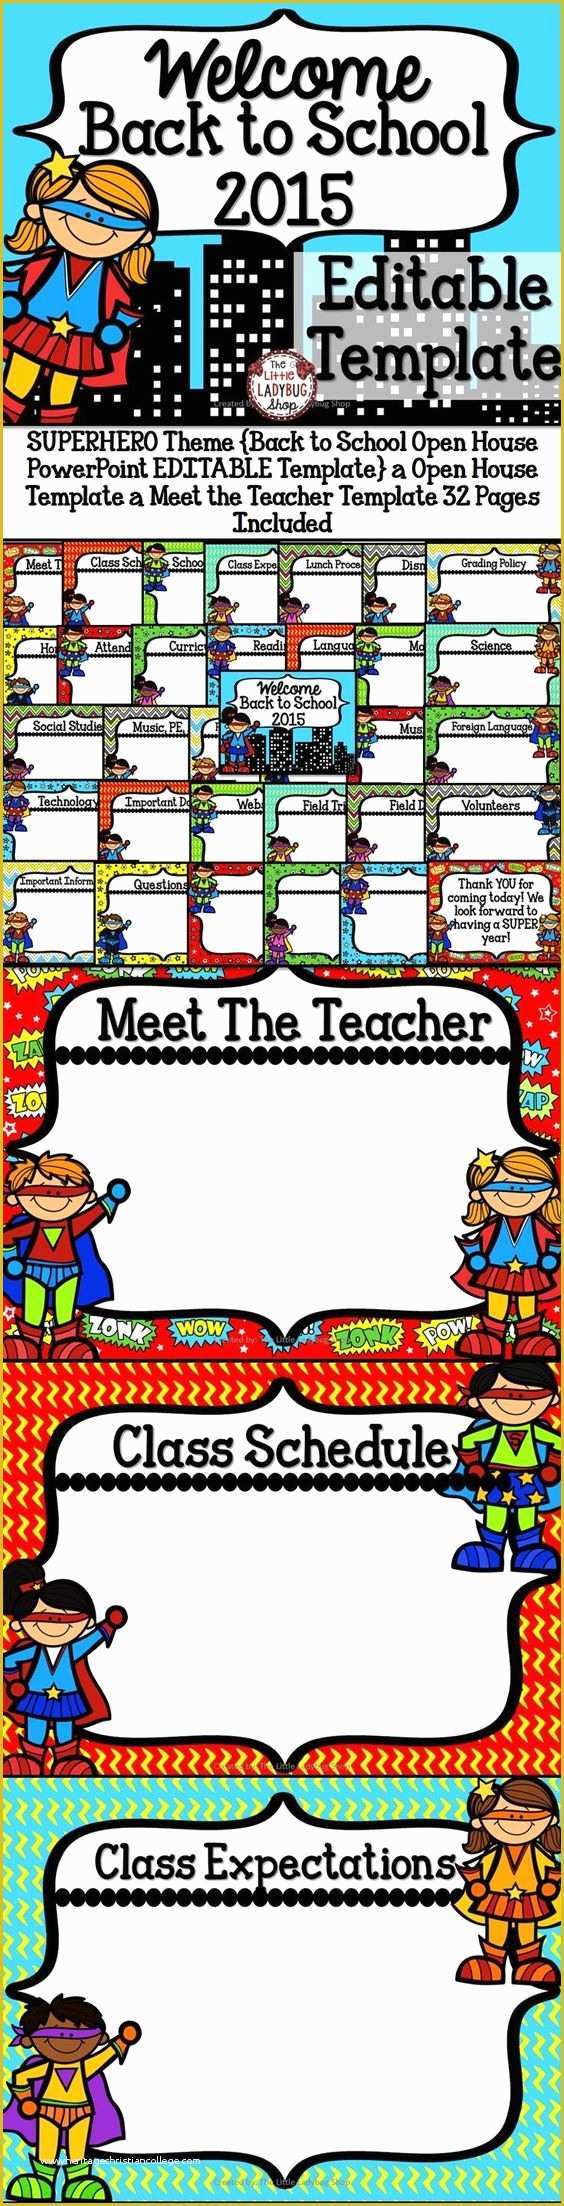 Superhero themed Powerpoint Template Free Of Superhero Back to School Powerpoint for Open House and